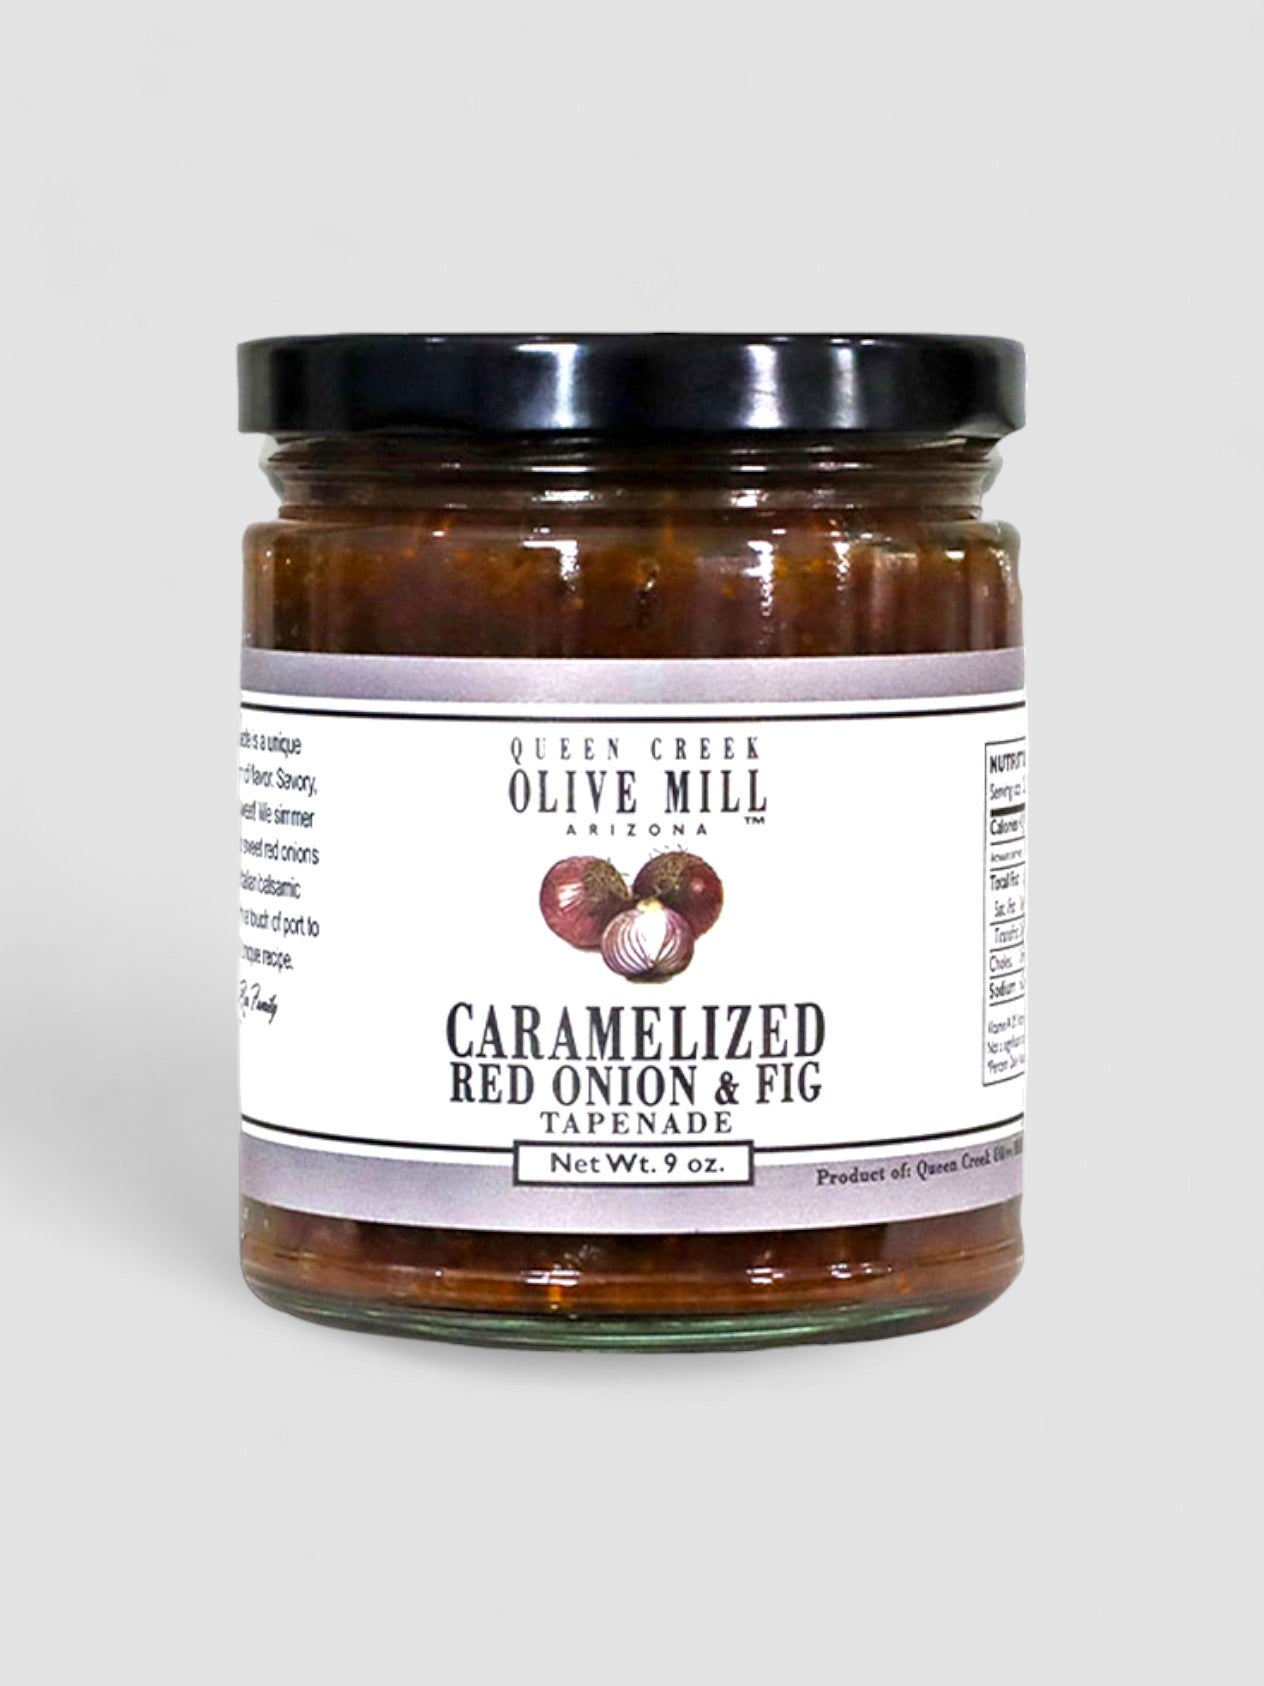 CARAMELIZED RED ONION & FIG TAPENADE